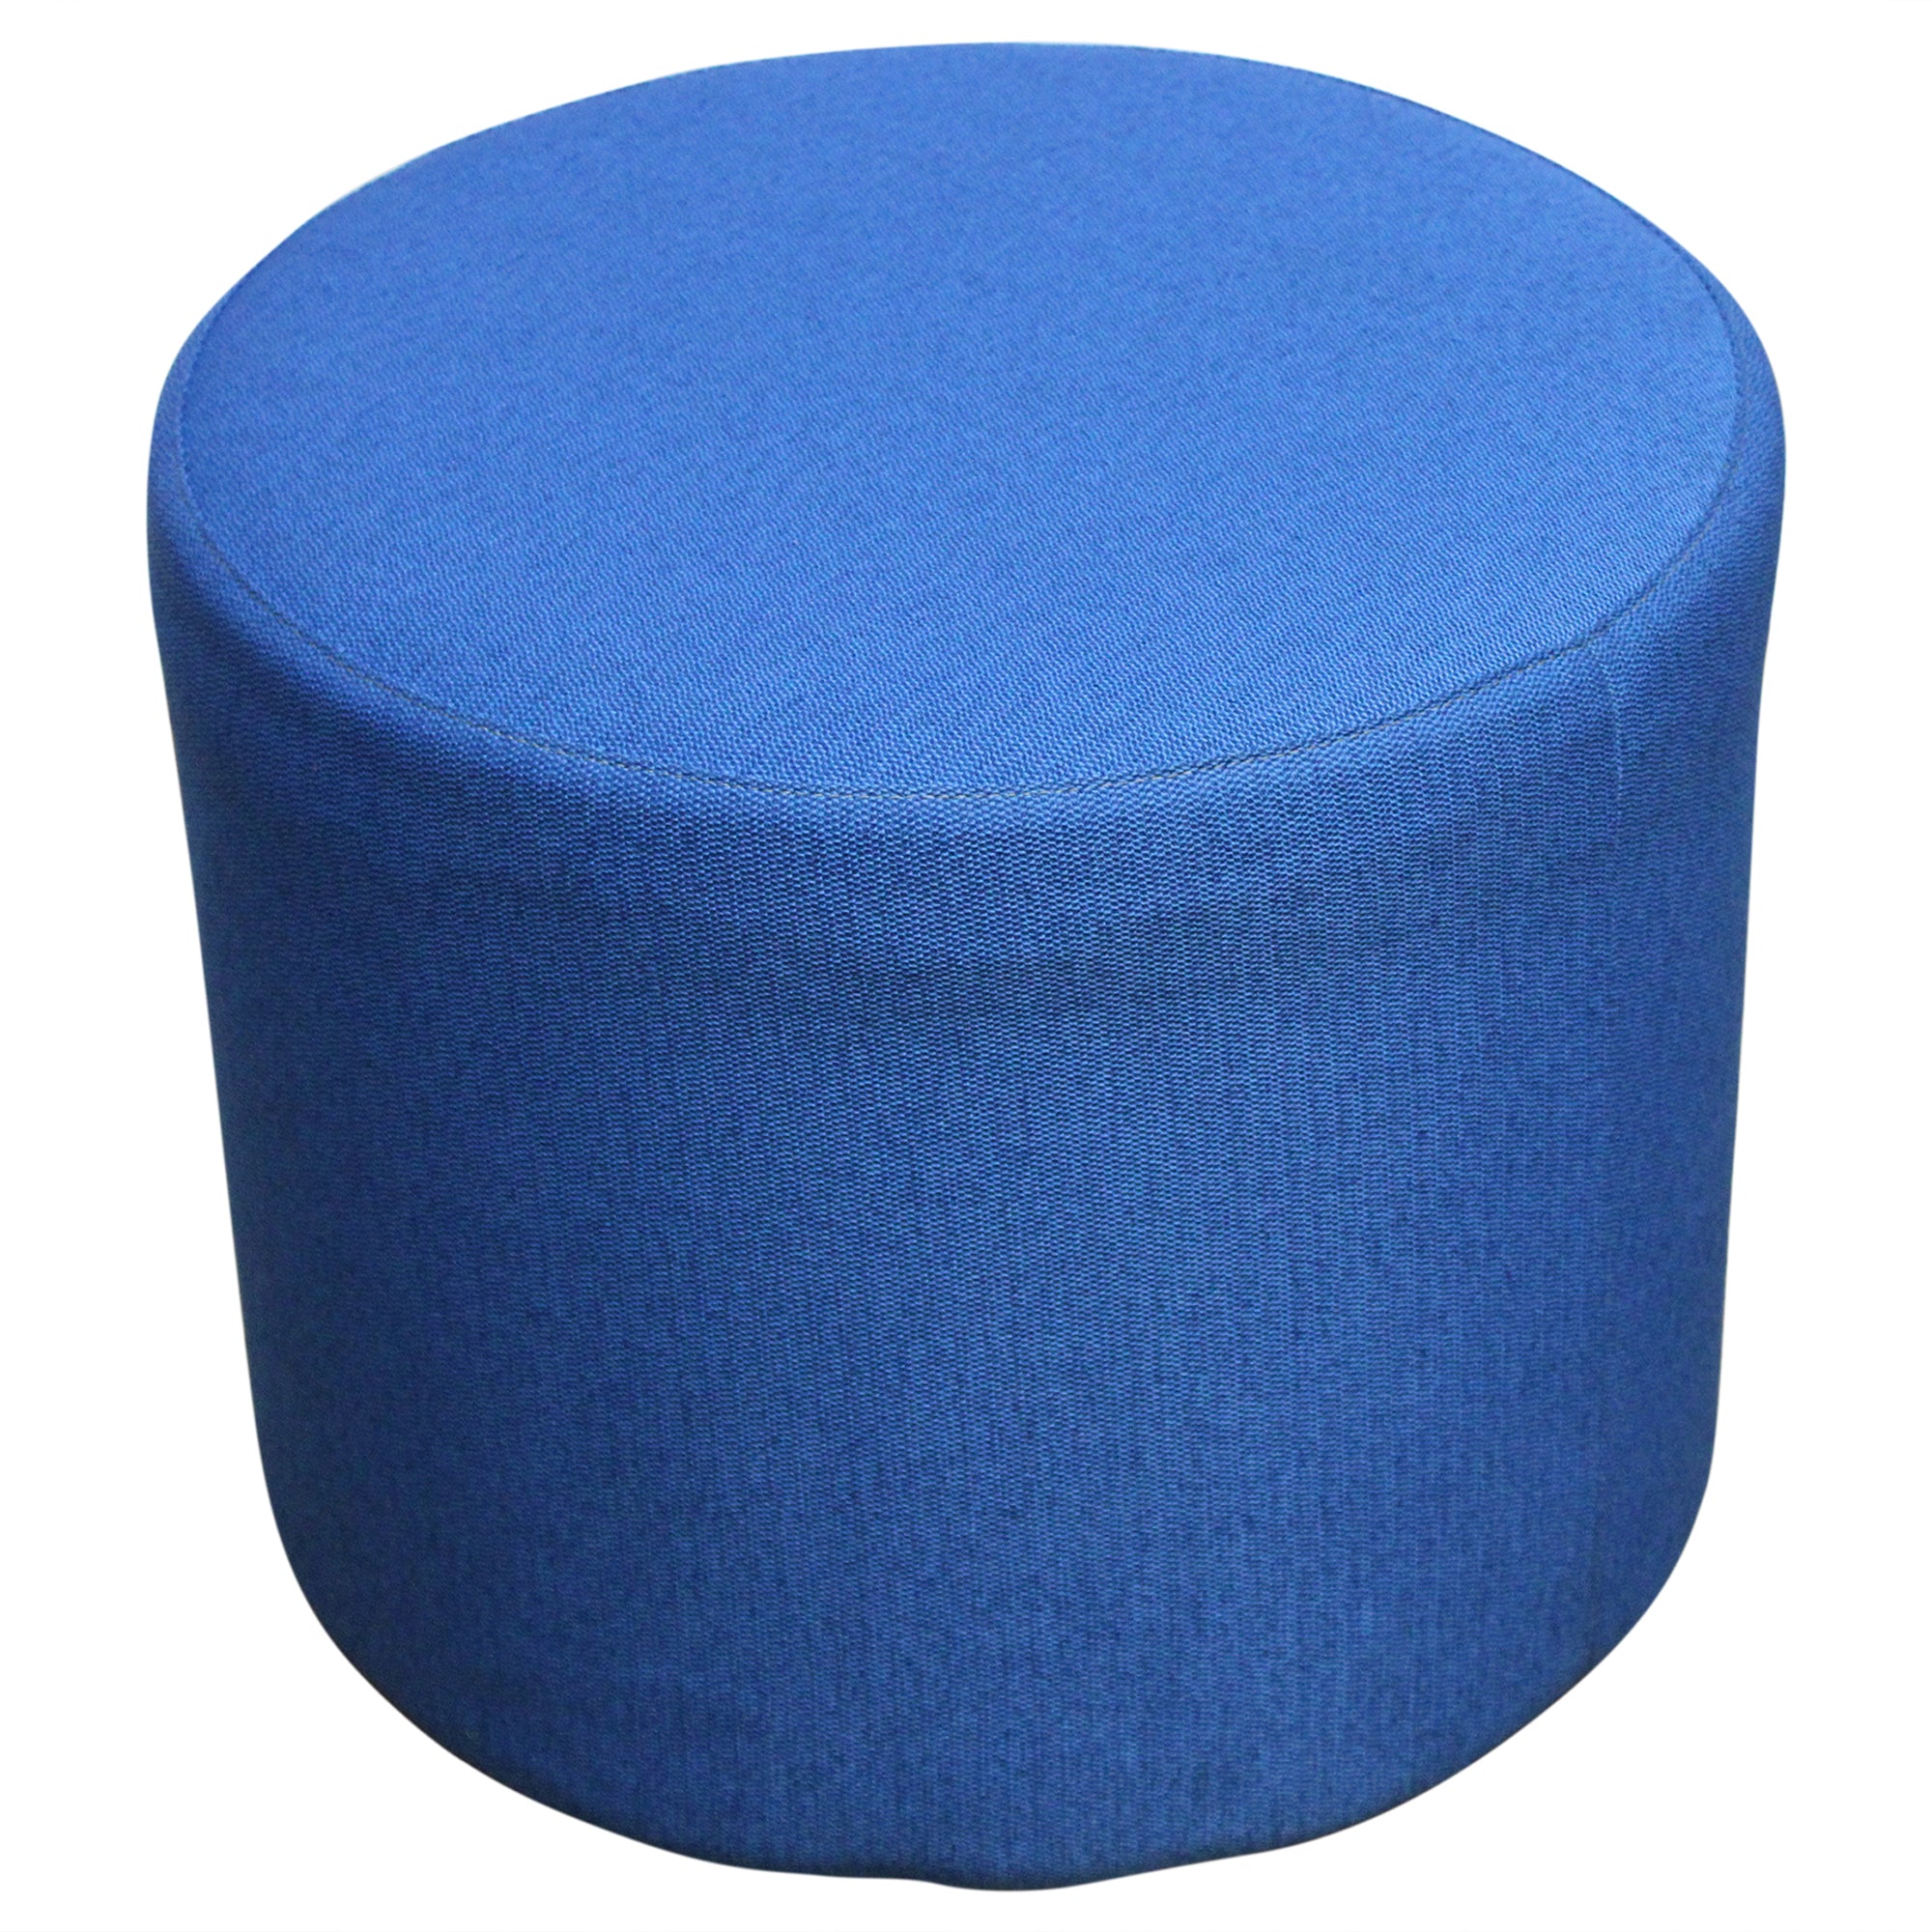 OFS Ottoman, Blue - Preowned